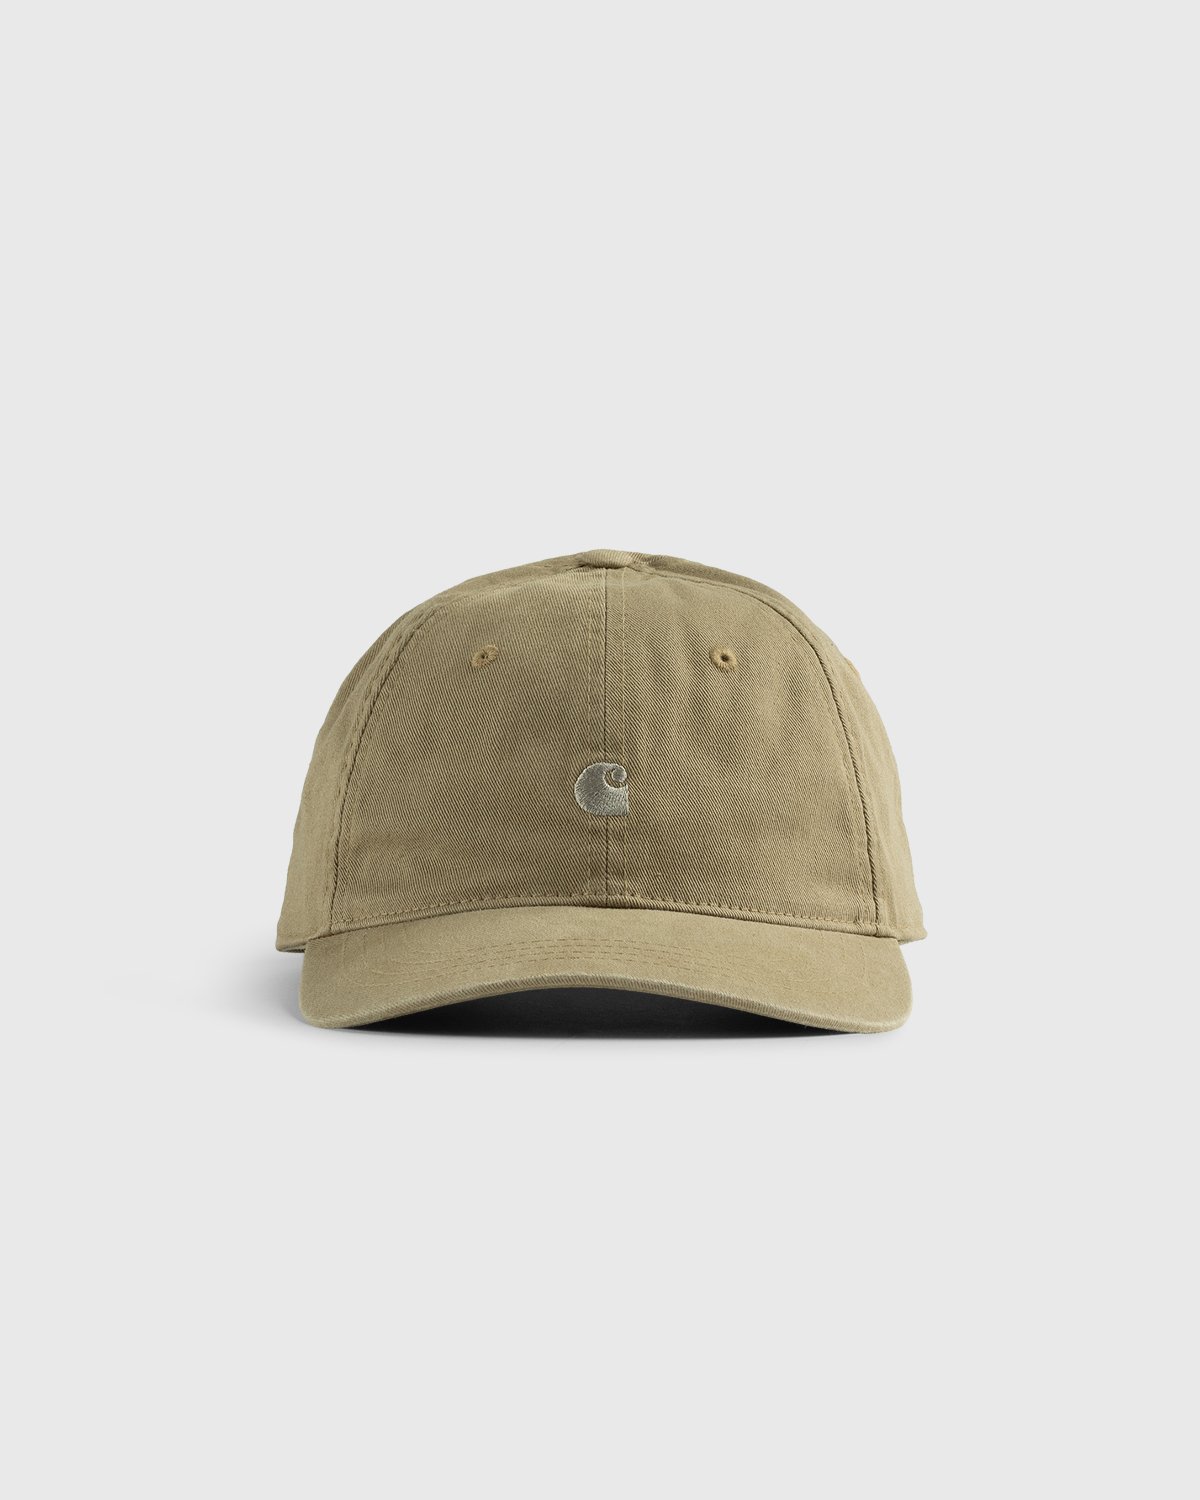 Carhartt WIP - Madison Logo Cap Natural Wall - Accessories - Beige - Image 2